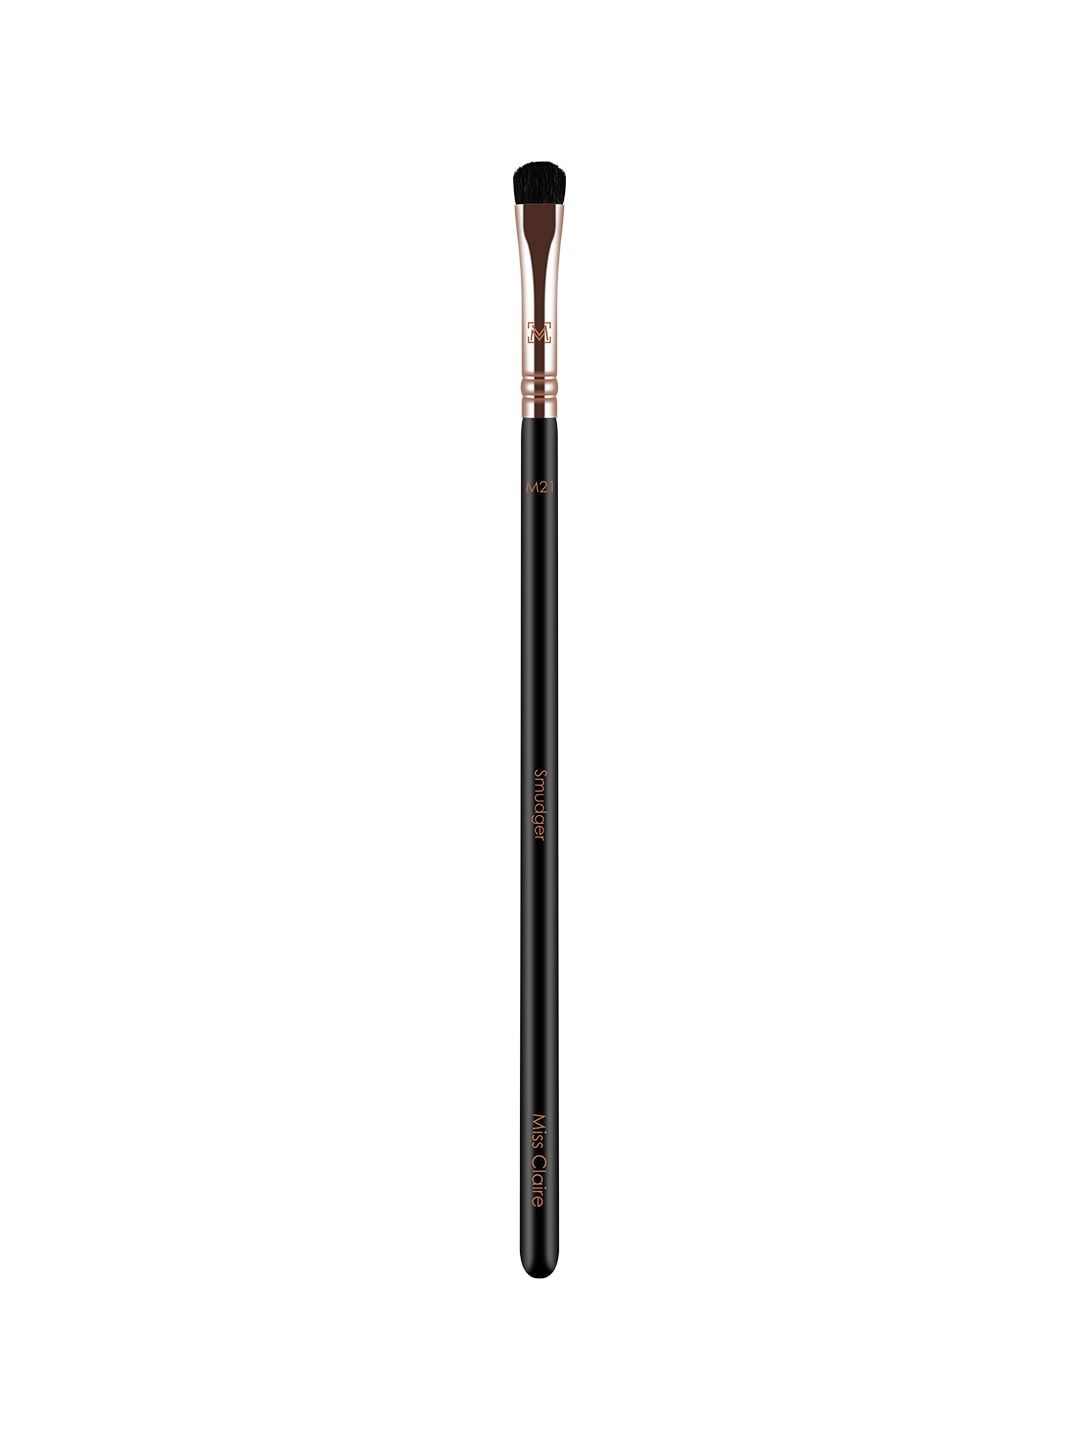 Miss Claire M21 - Smudger Eye Brush - Rose Gold-Toned & Black Price in India